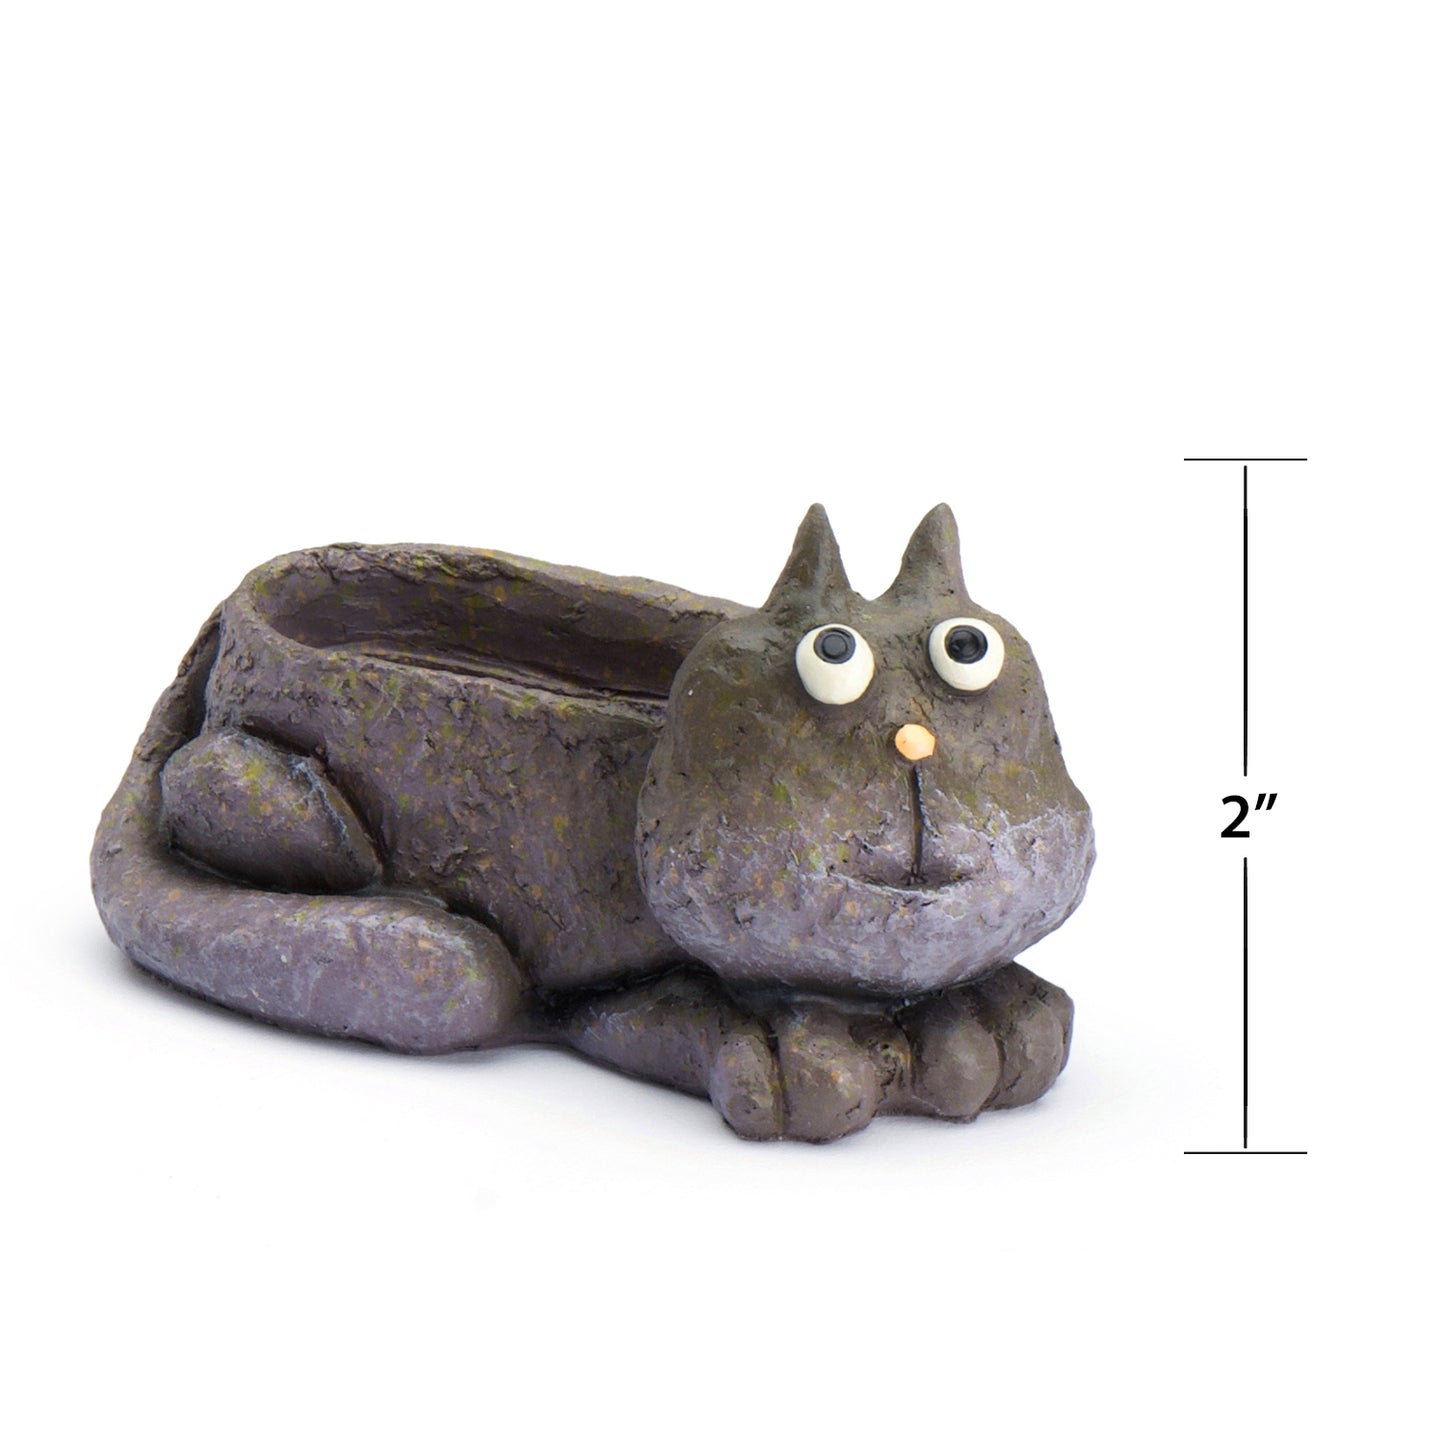 Violet Cat Mom & Baby Planters, Set of 2